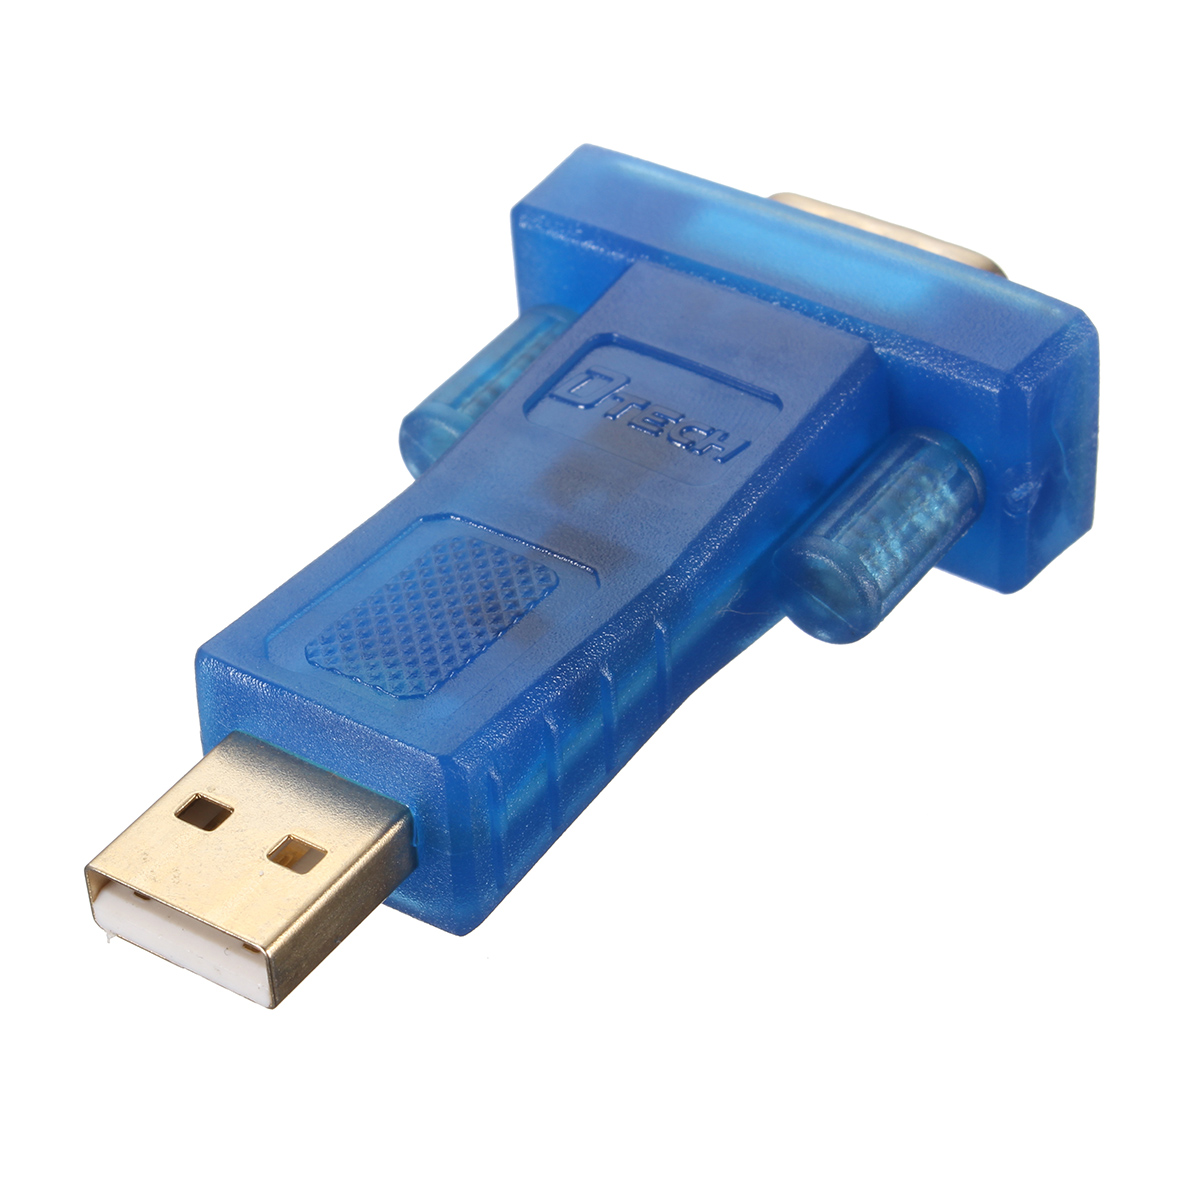 Dtech-DT-5010-USB-to-RS232-Serial-Port-Adapter-1147444